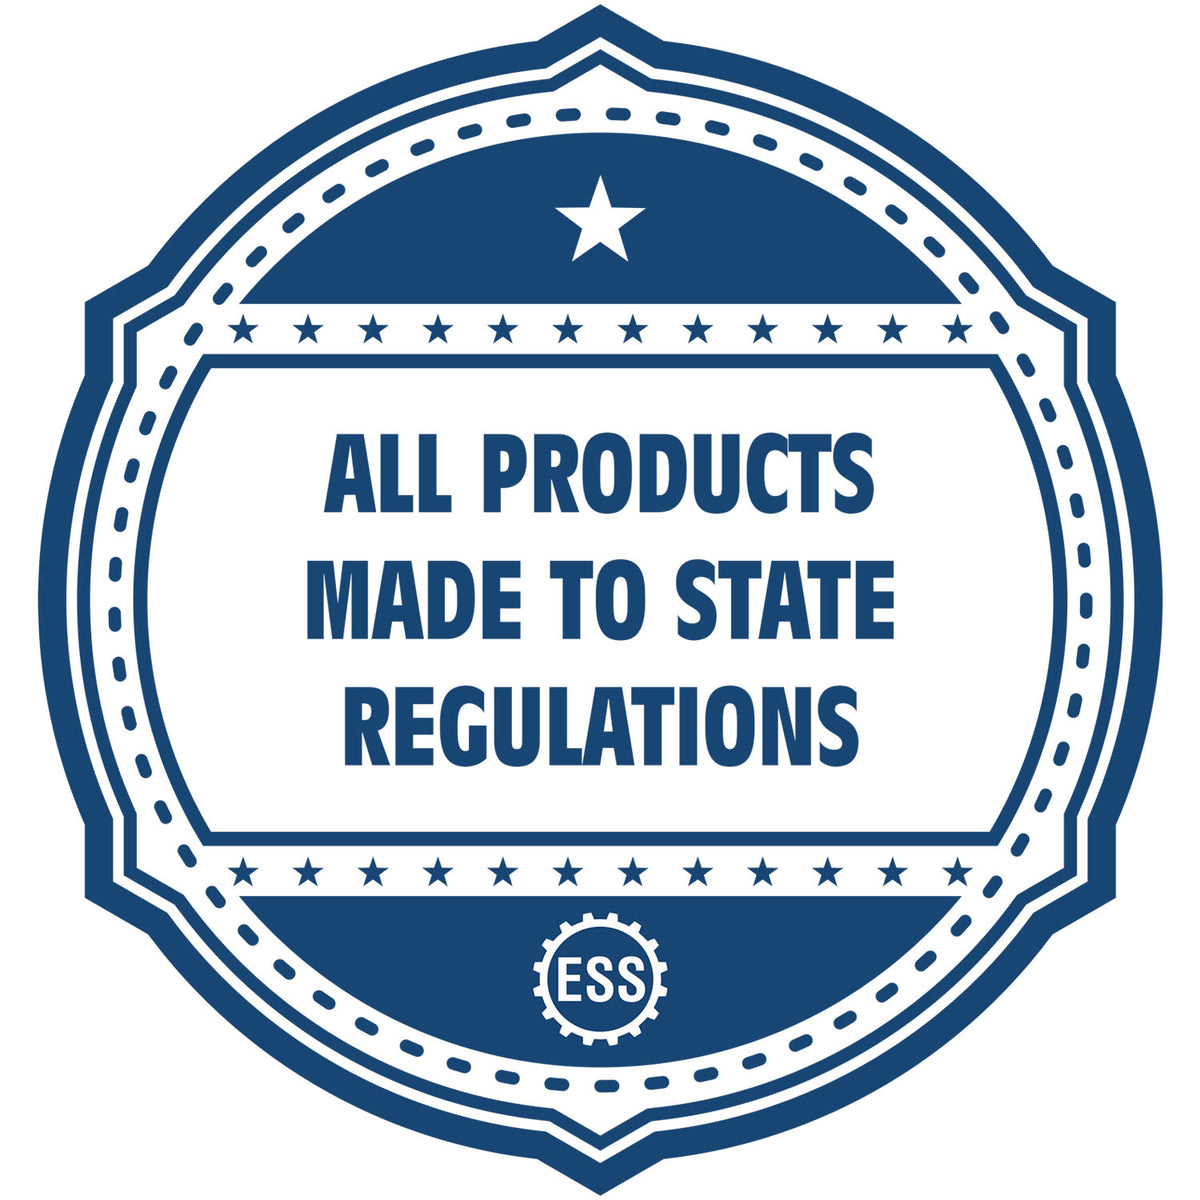 An icon or badge element for the Digital Michigan PE Stamp and Electronic Seal for Michigan Engineer showing that this product is made in compliance with state regulations.